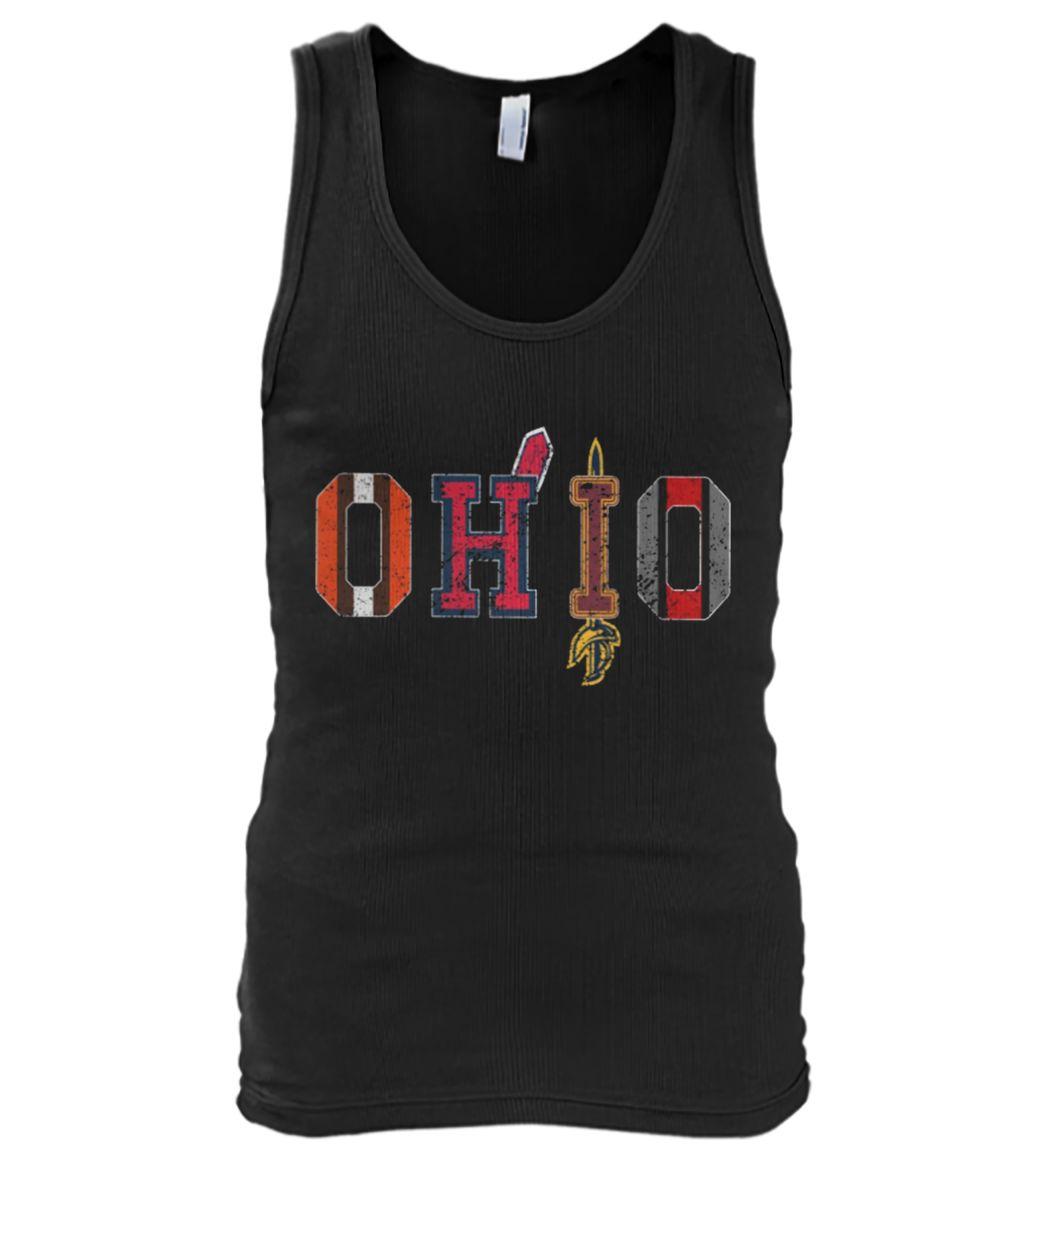 Ohio teams cleveland browns indians cavaliers ohio state tank top